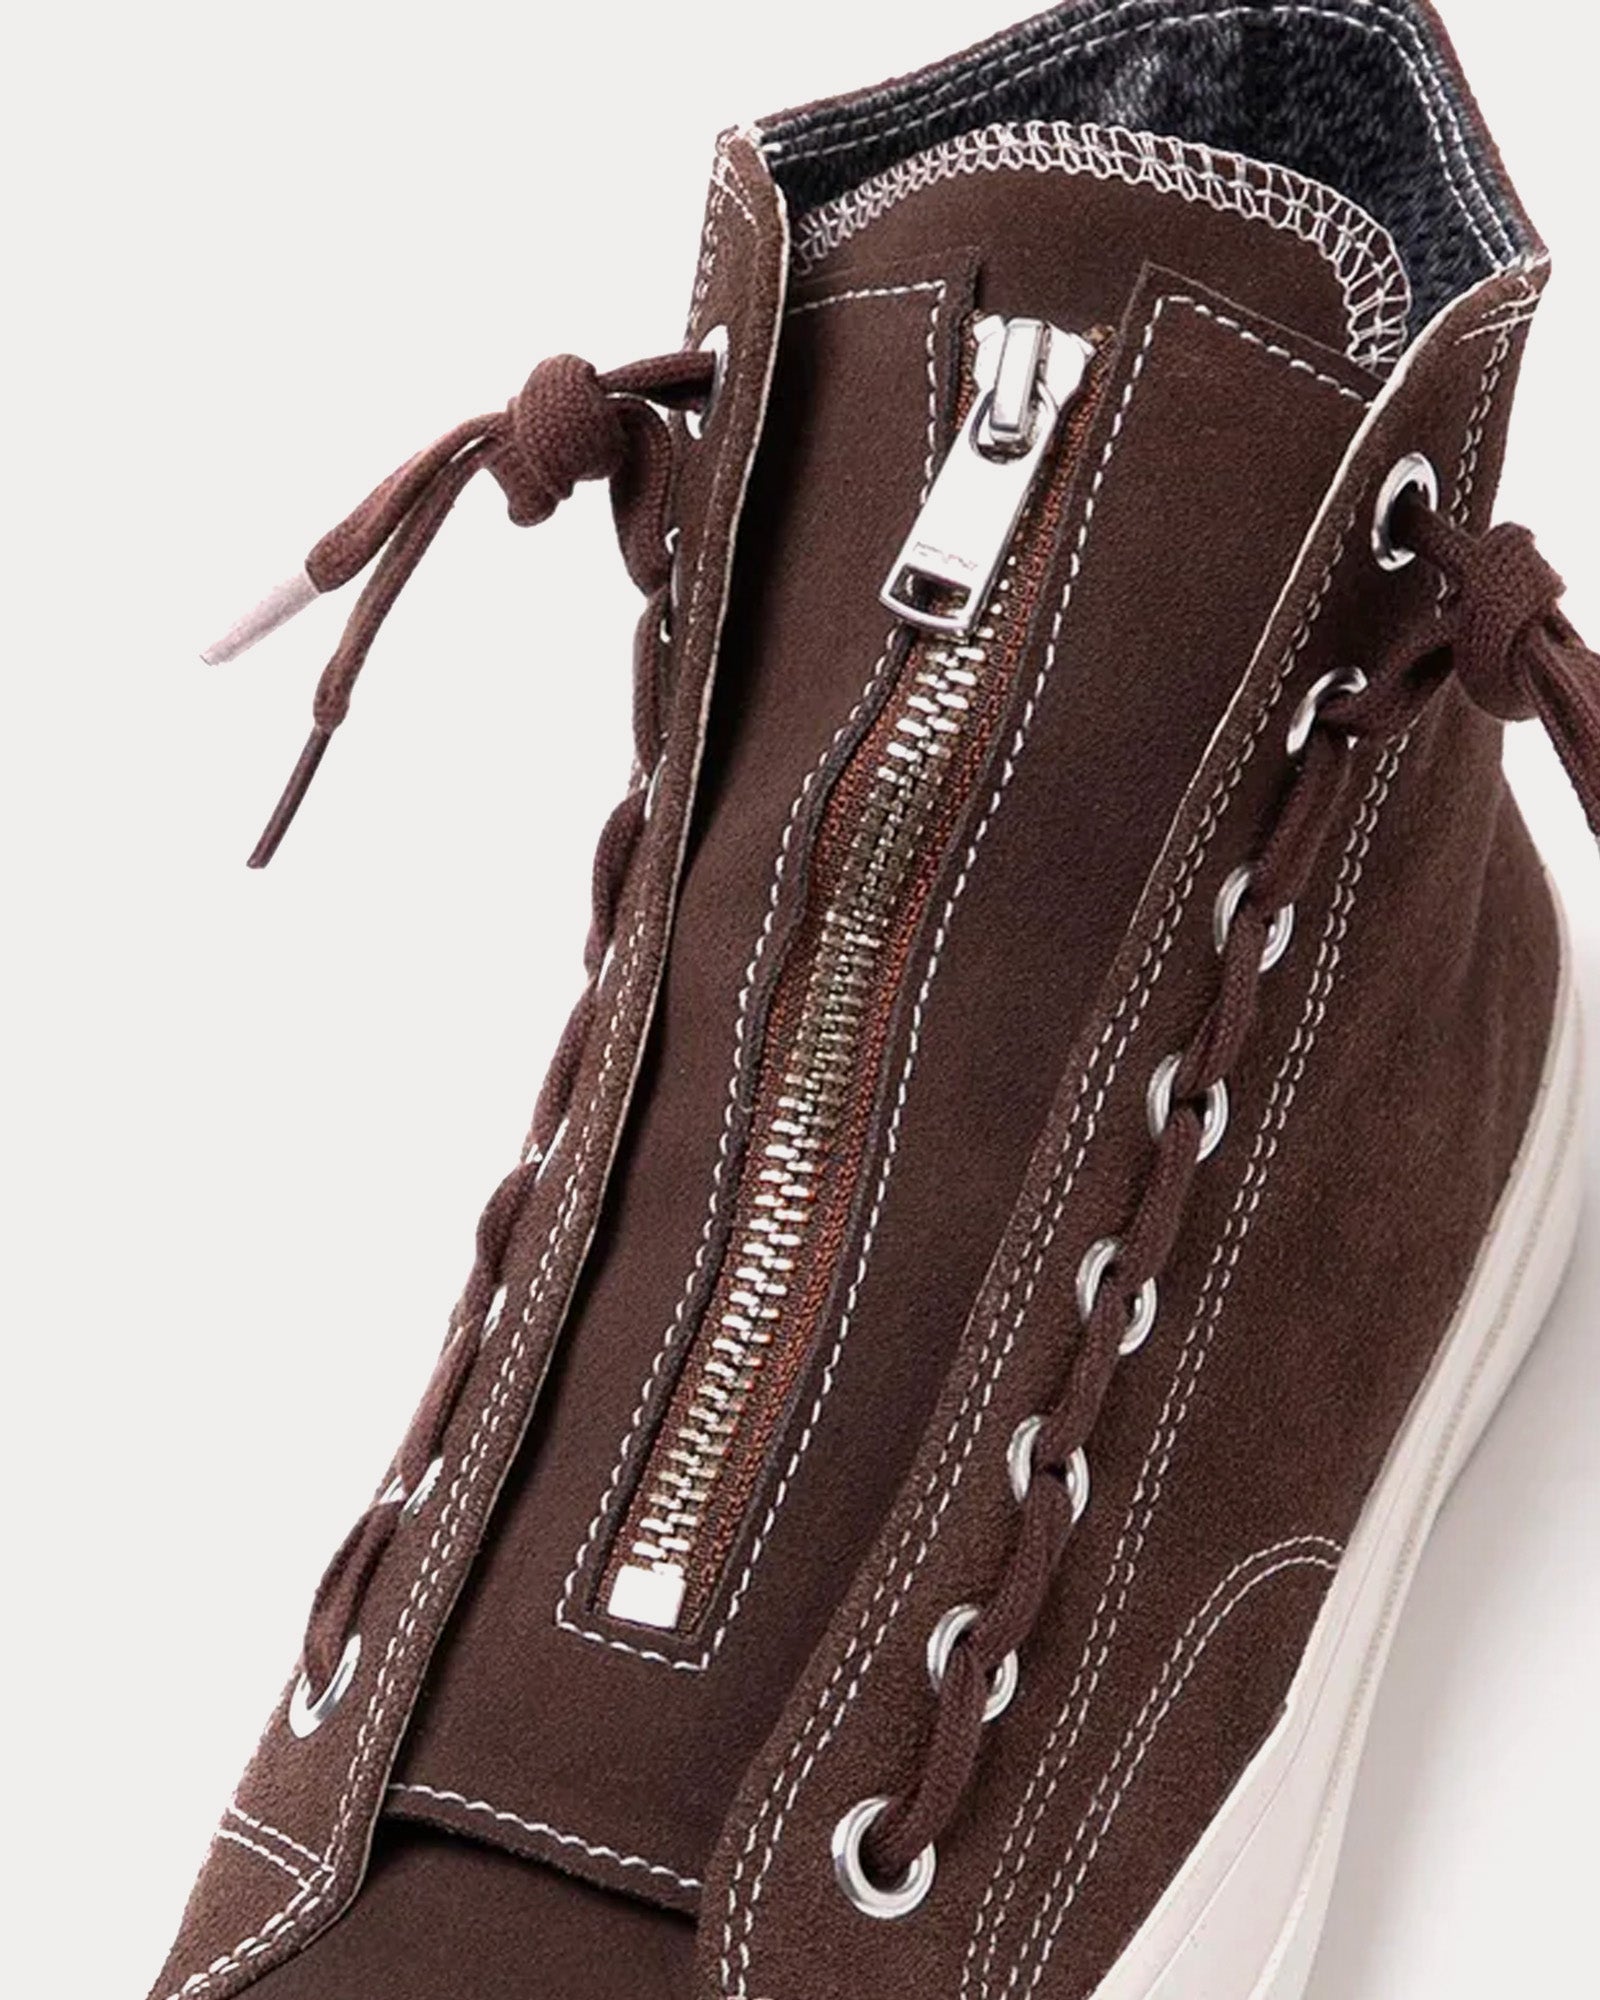 Nonnative - Dweller Hi Cow Leather with Gore-Tex Brown / White High Top Sneakers